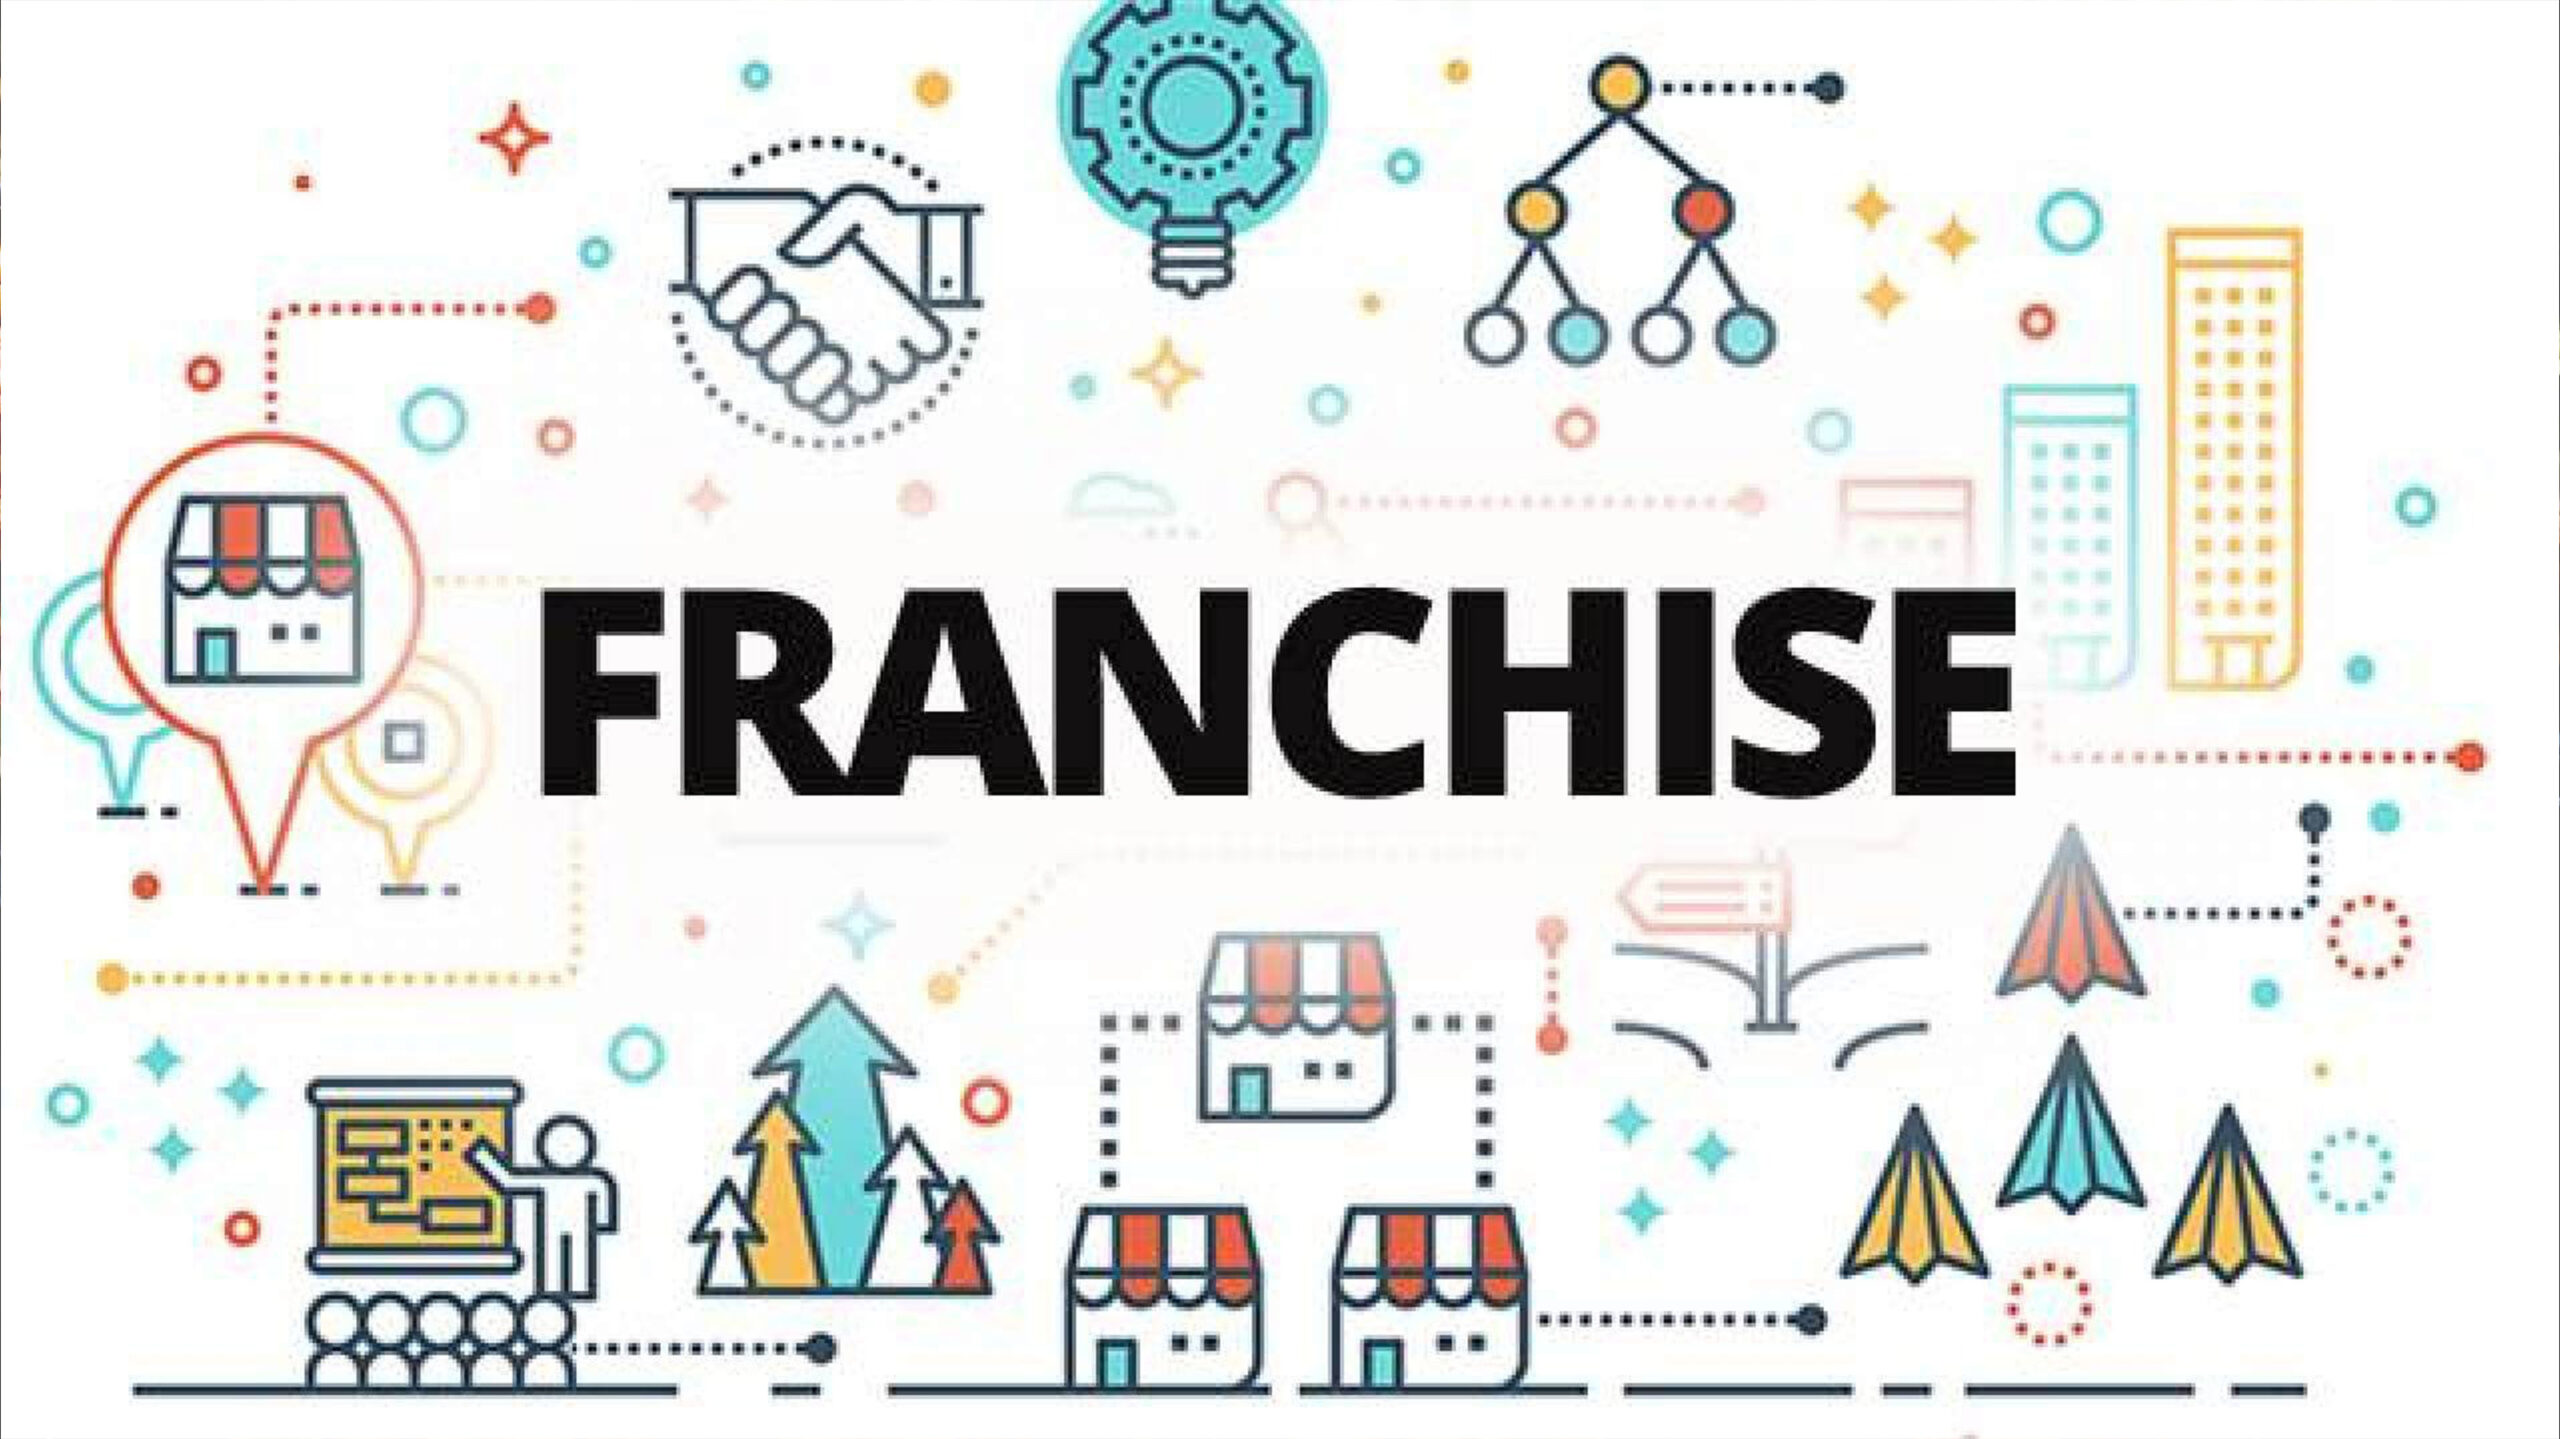 Know More About The Different Types of Franchise